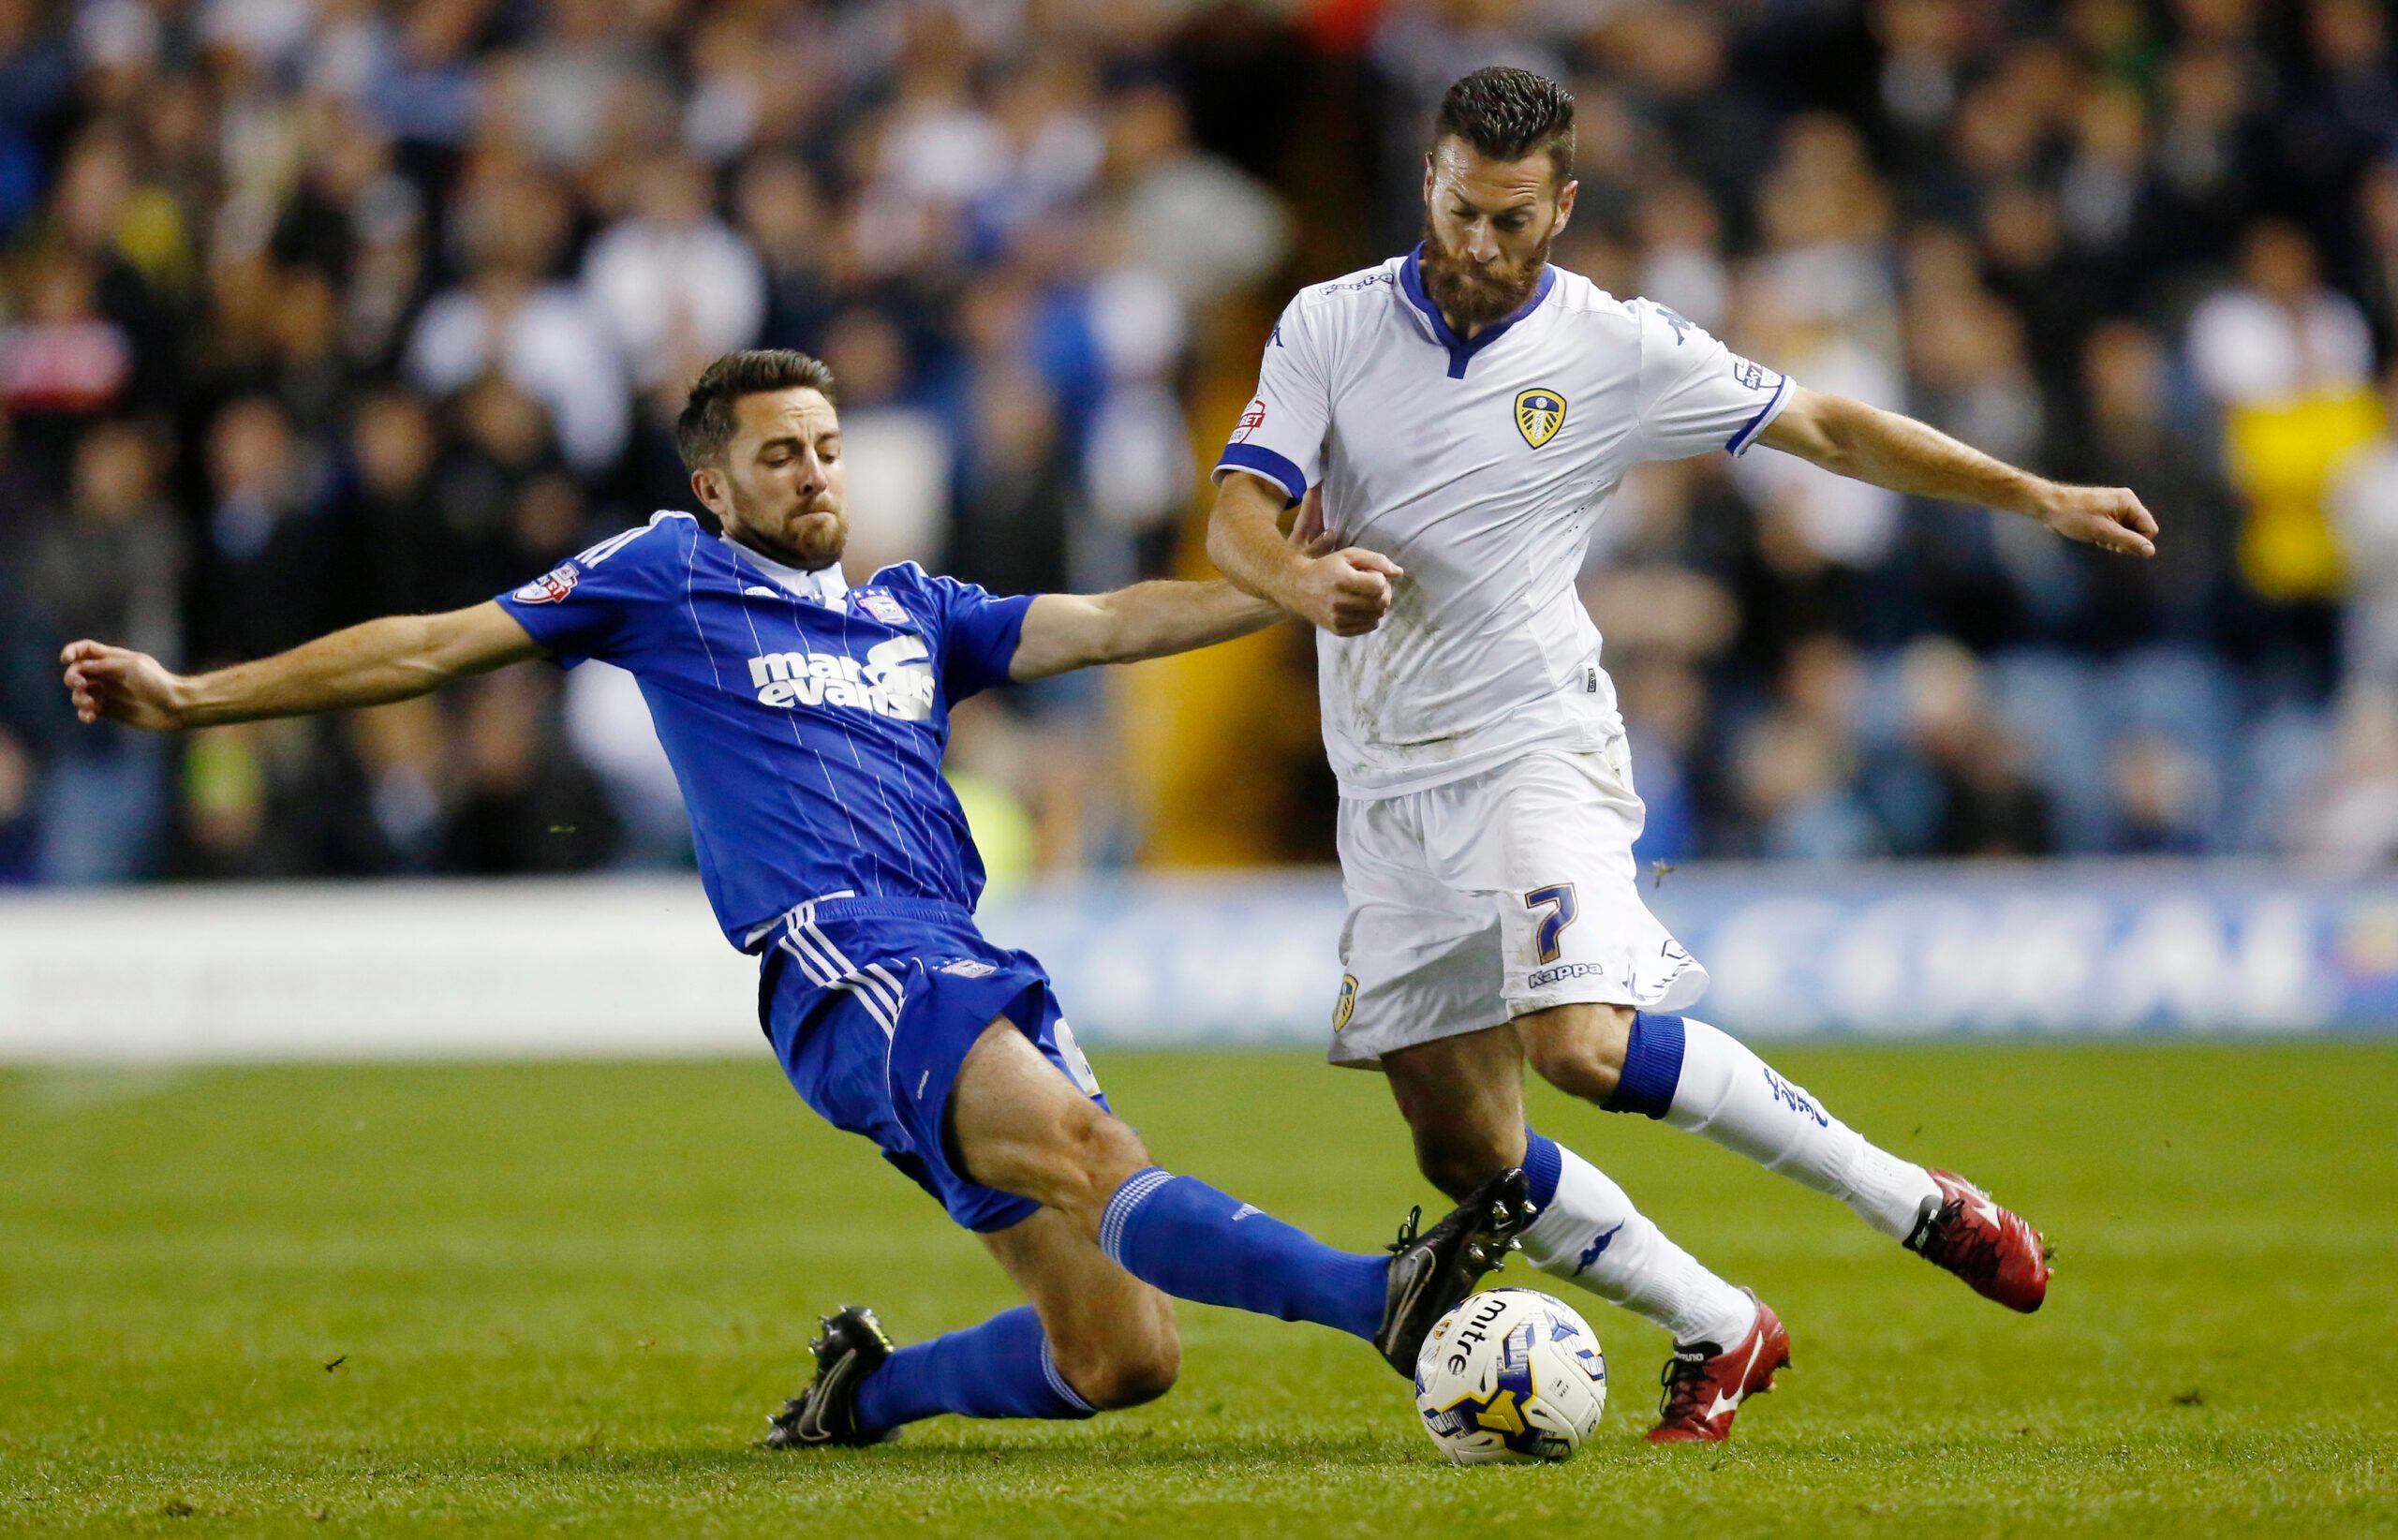 Football - Leeds United v Ipswich Town - Sky Bet Football League Championship - Elland Road - 15/9/15 
Cole Skuse of Ipswich Town (L) and Mirco Antenucci of Leeds United in action 
Mandatory Credit: Action Images / Ed Sykes 
Livepic 
EDITORIAL USE ONLY. No use with unauthorized audio, video, data, fixture lists, club/league logos or 